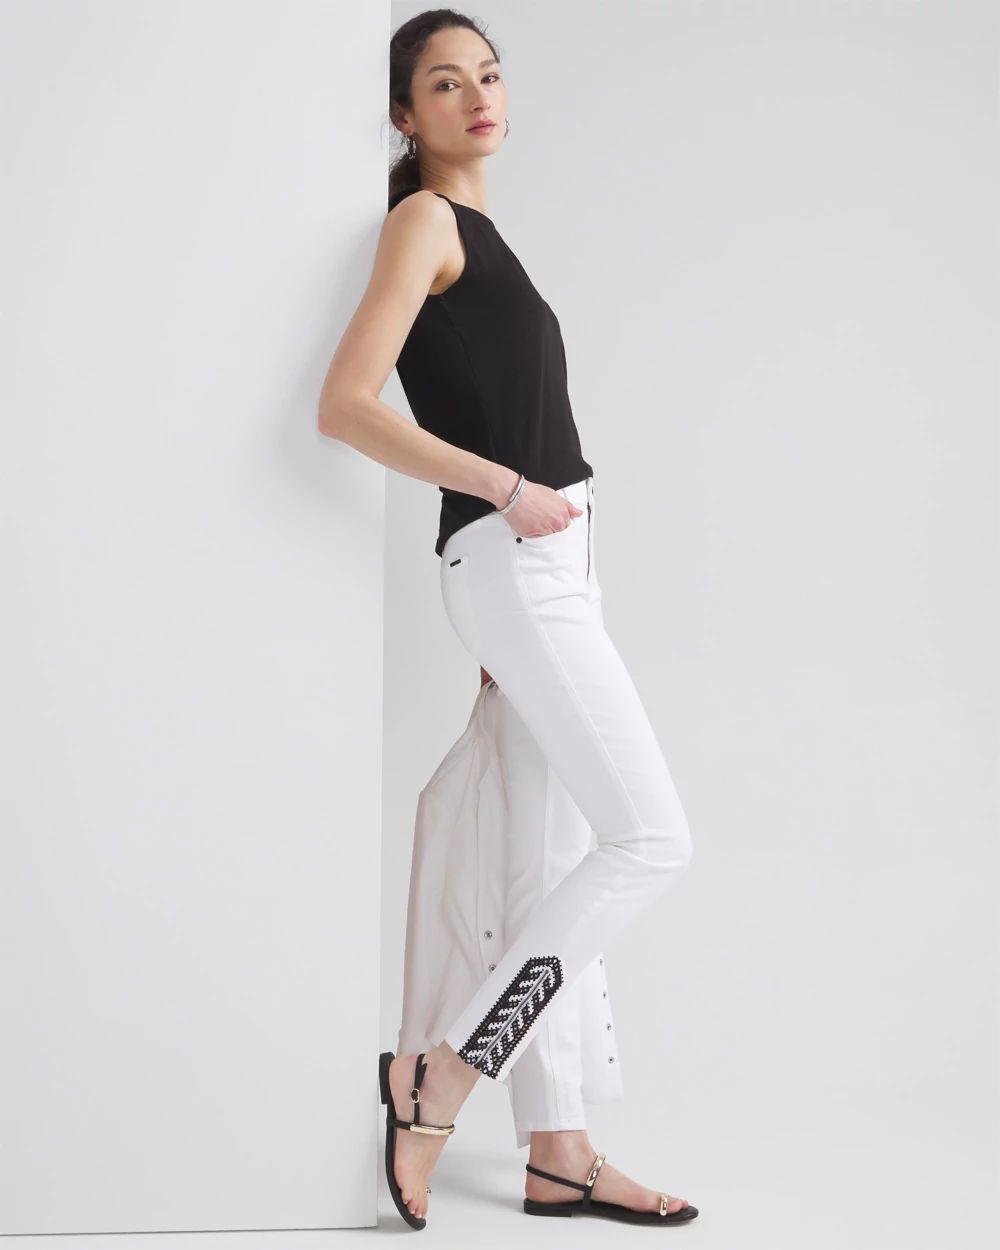 High-Rise Printed Hem Skinny Ankle Jeans click to view larger image.